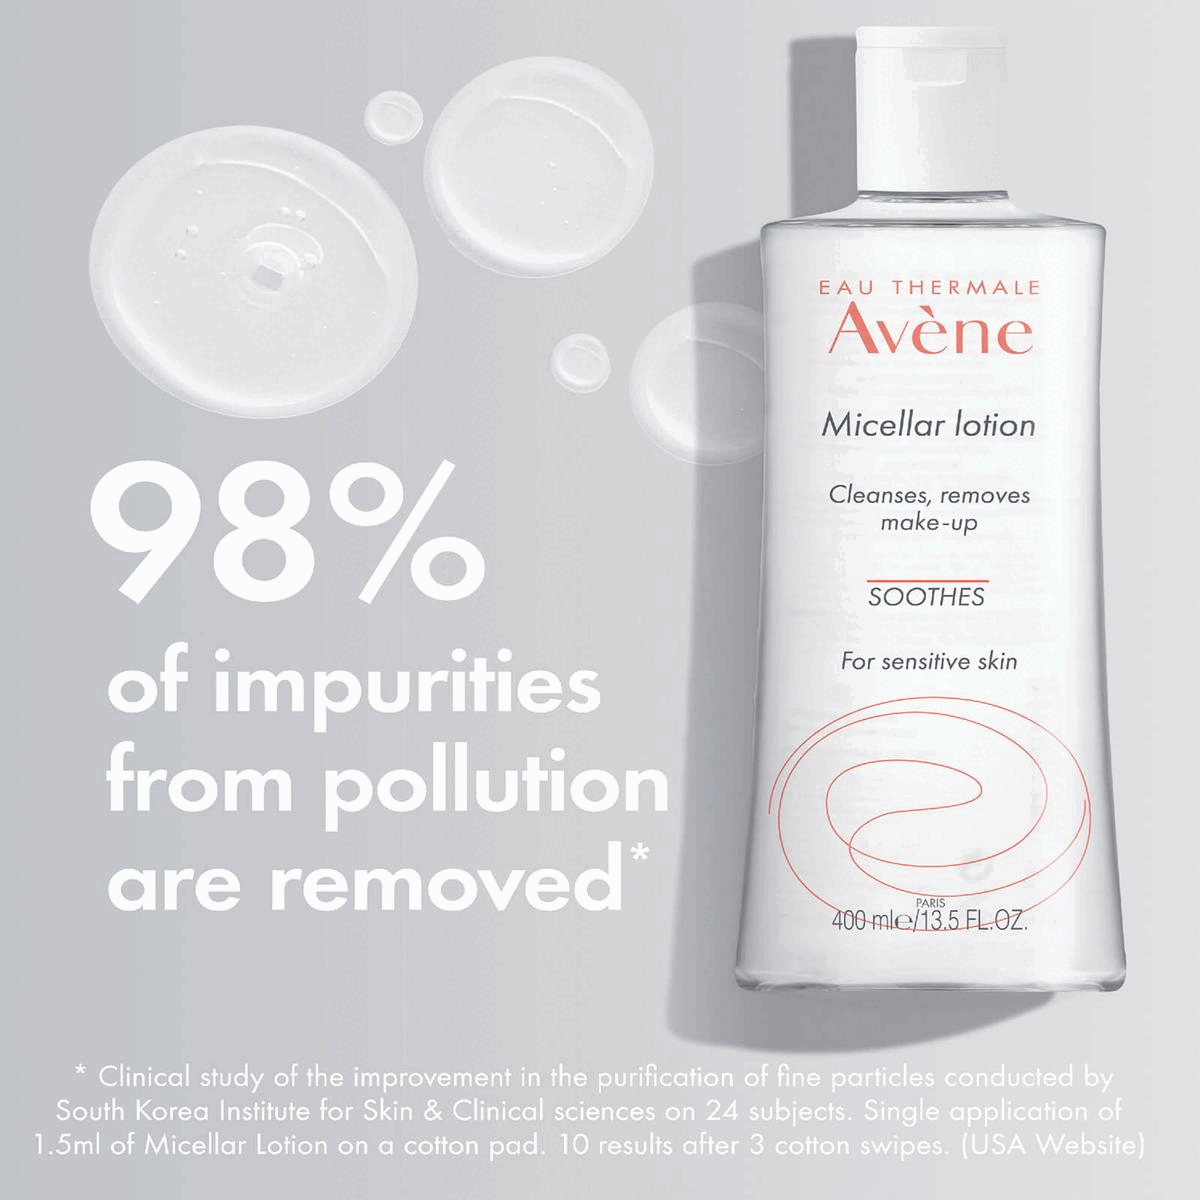 98% of impurities from pollution are removed. Your routine. Tested on sensitive skin, recommended by dermatologists.